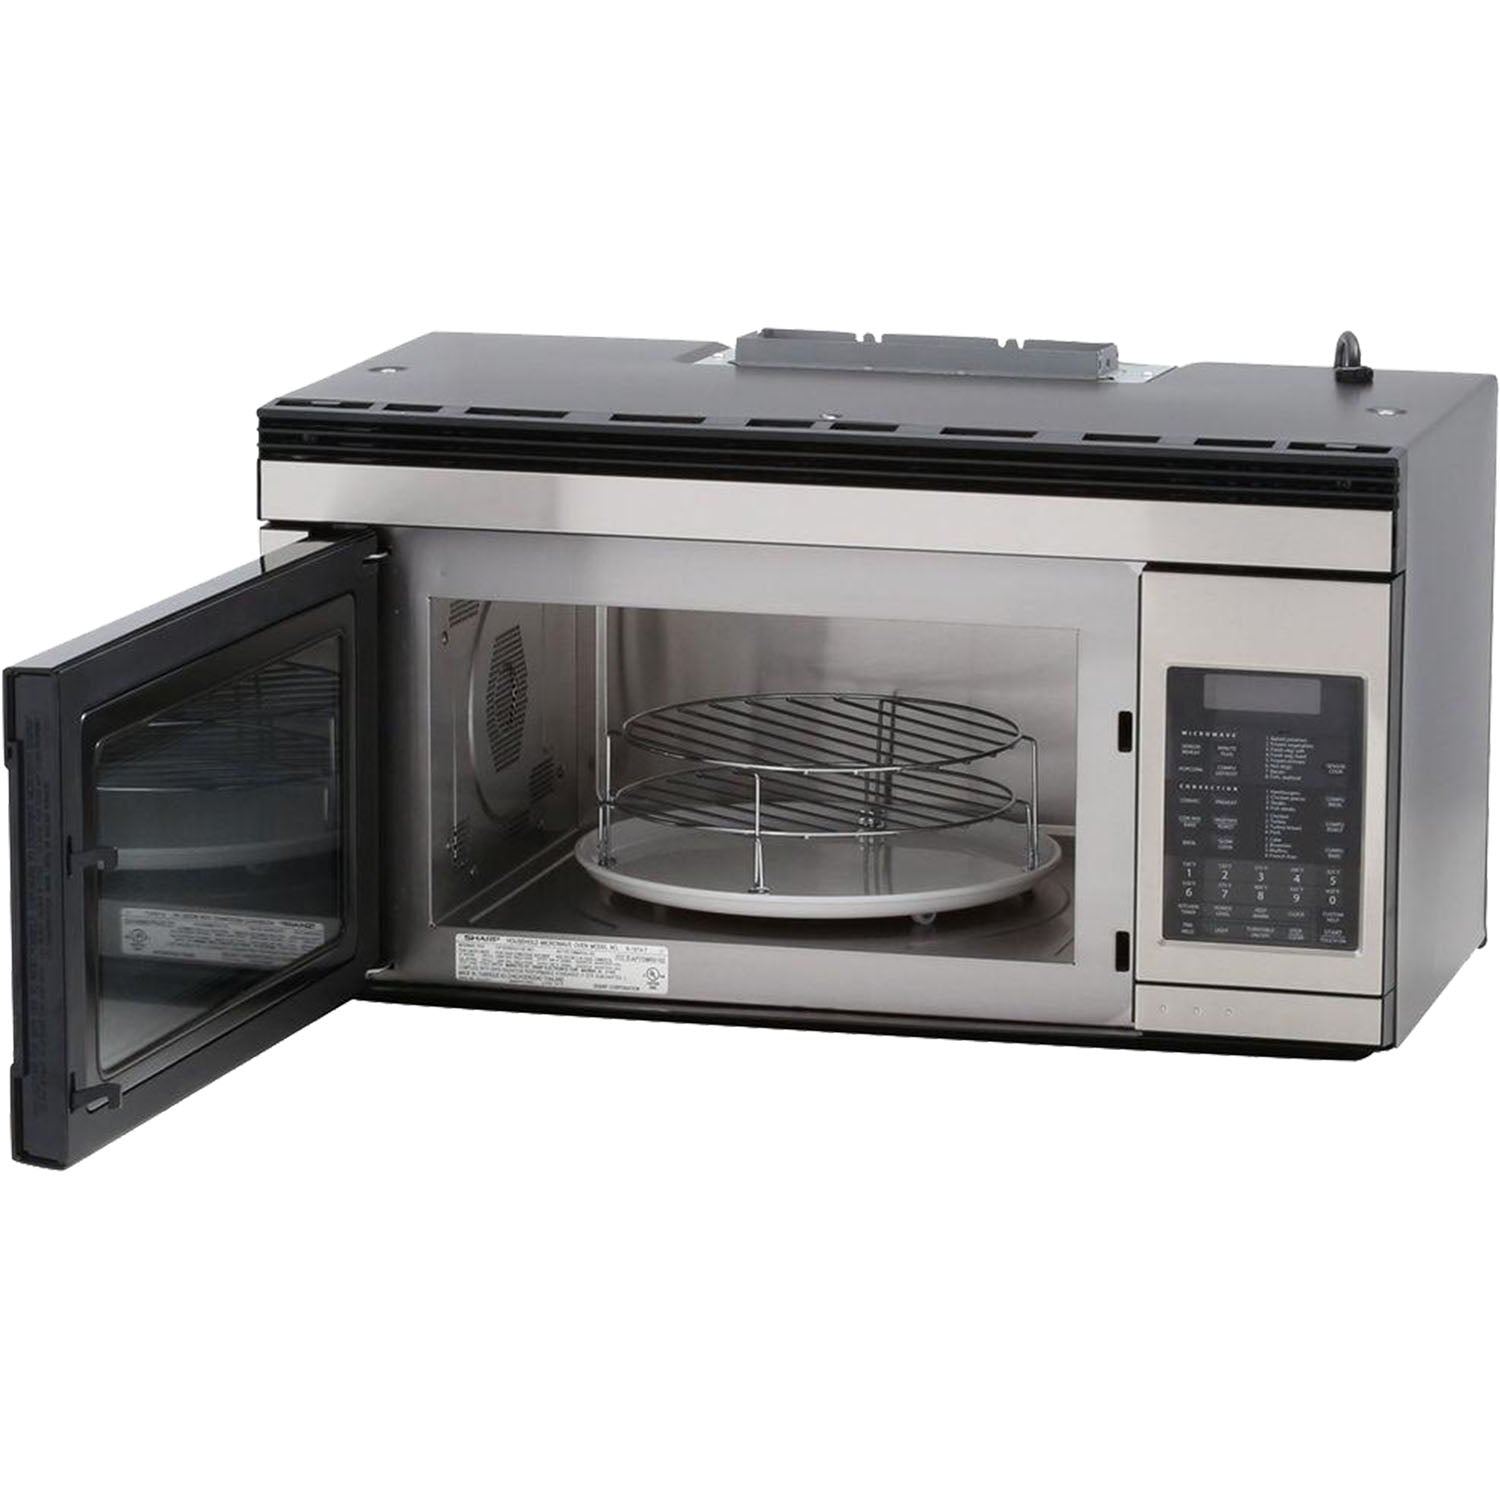 Sharp 1.1 cu. ft. 850W 30 in. Over-the-Range Convection Microwave in Stainless Steel (R1874T)